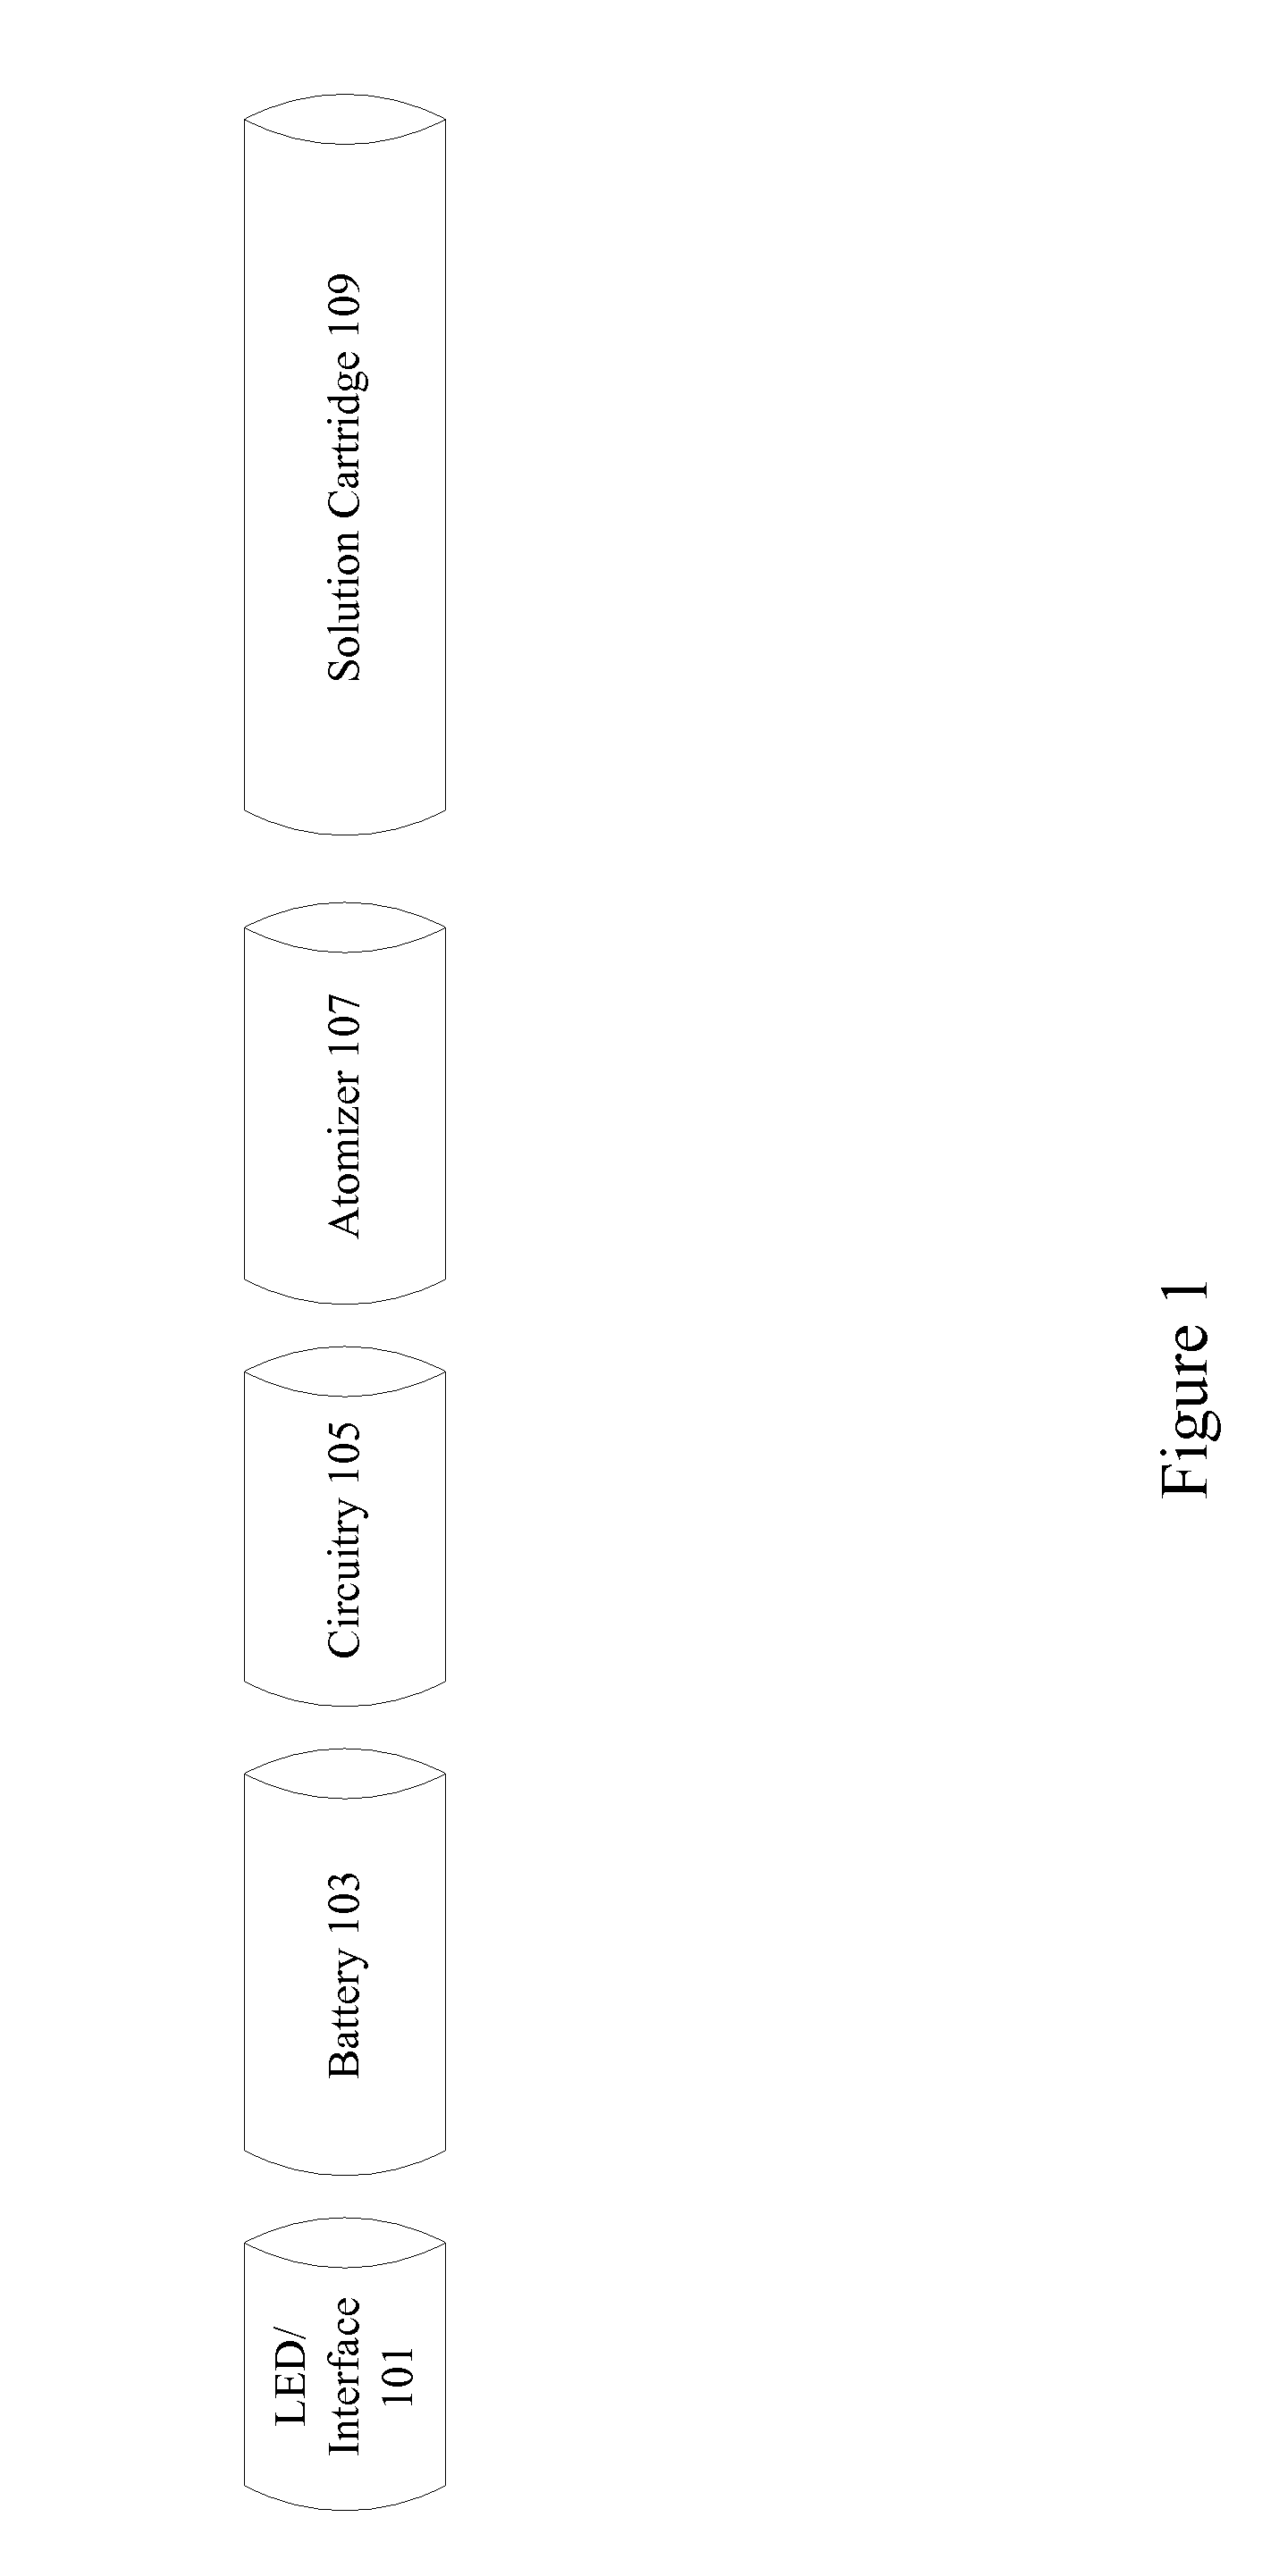 Methods and apparatus for nicotine delivery reduction